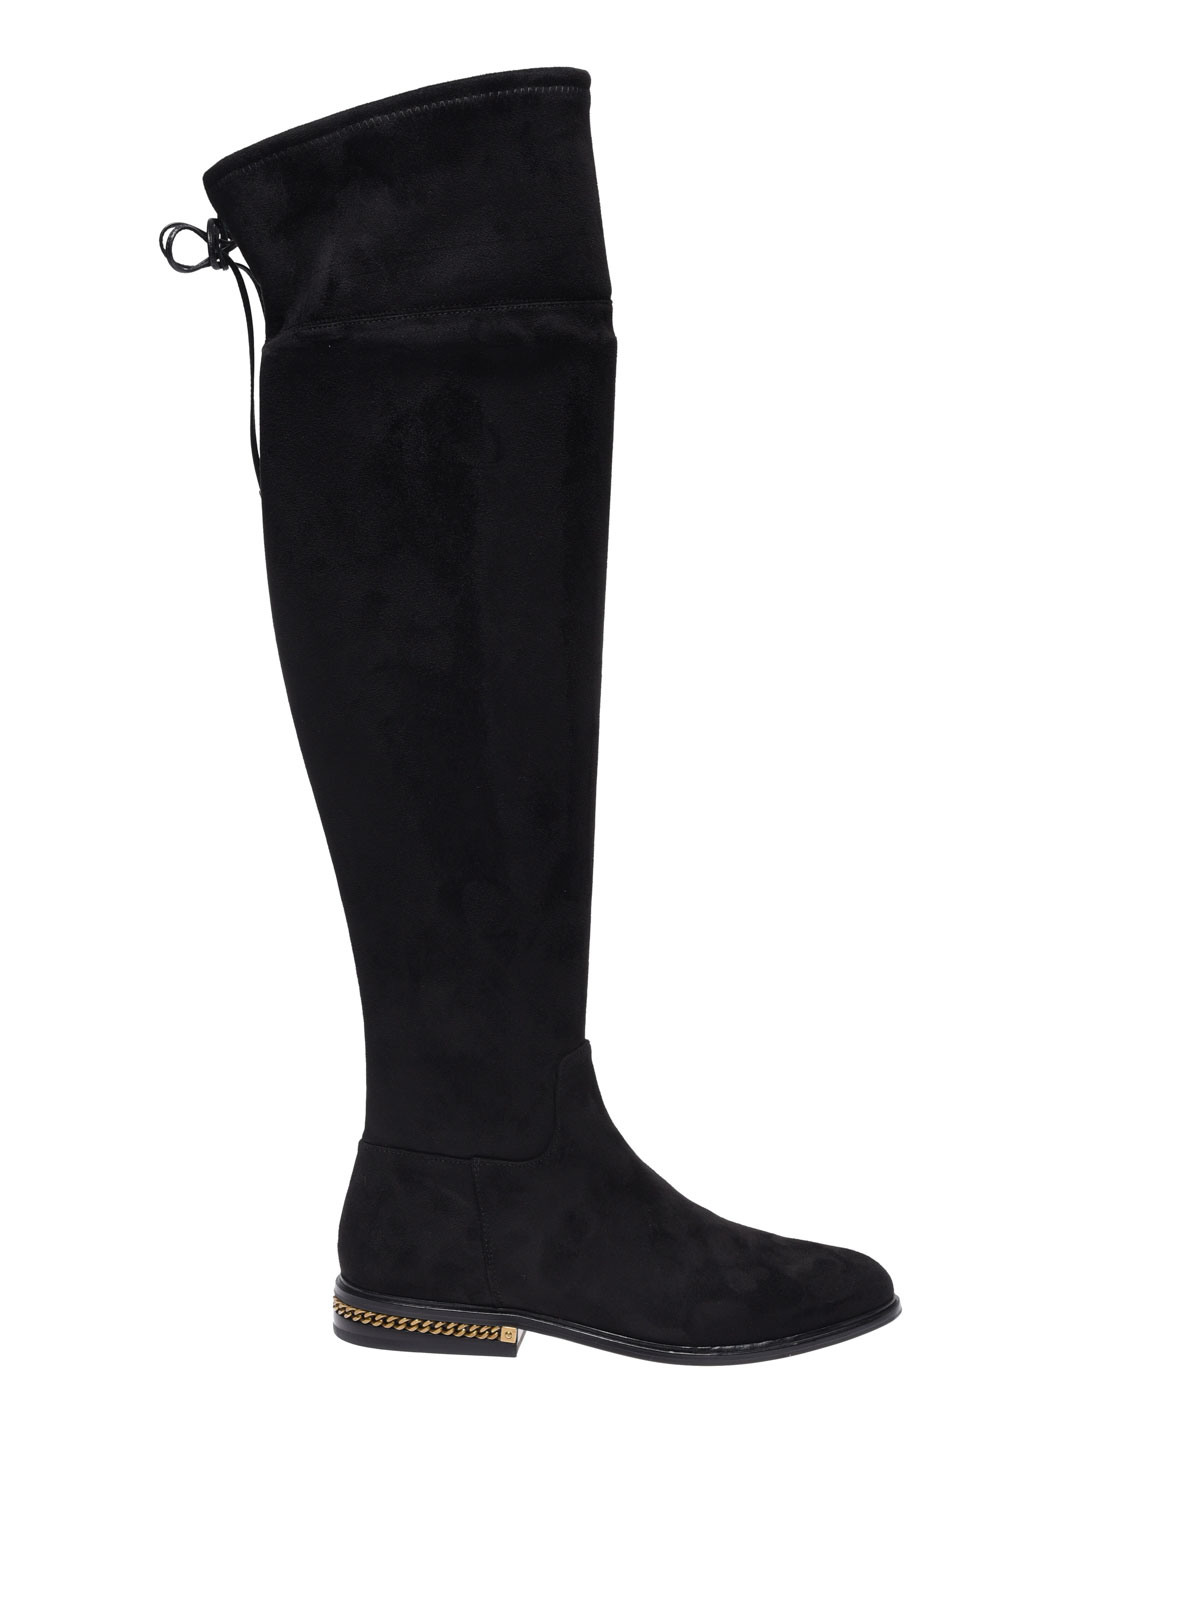 mk jamie over the knee boots